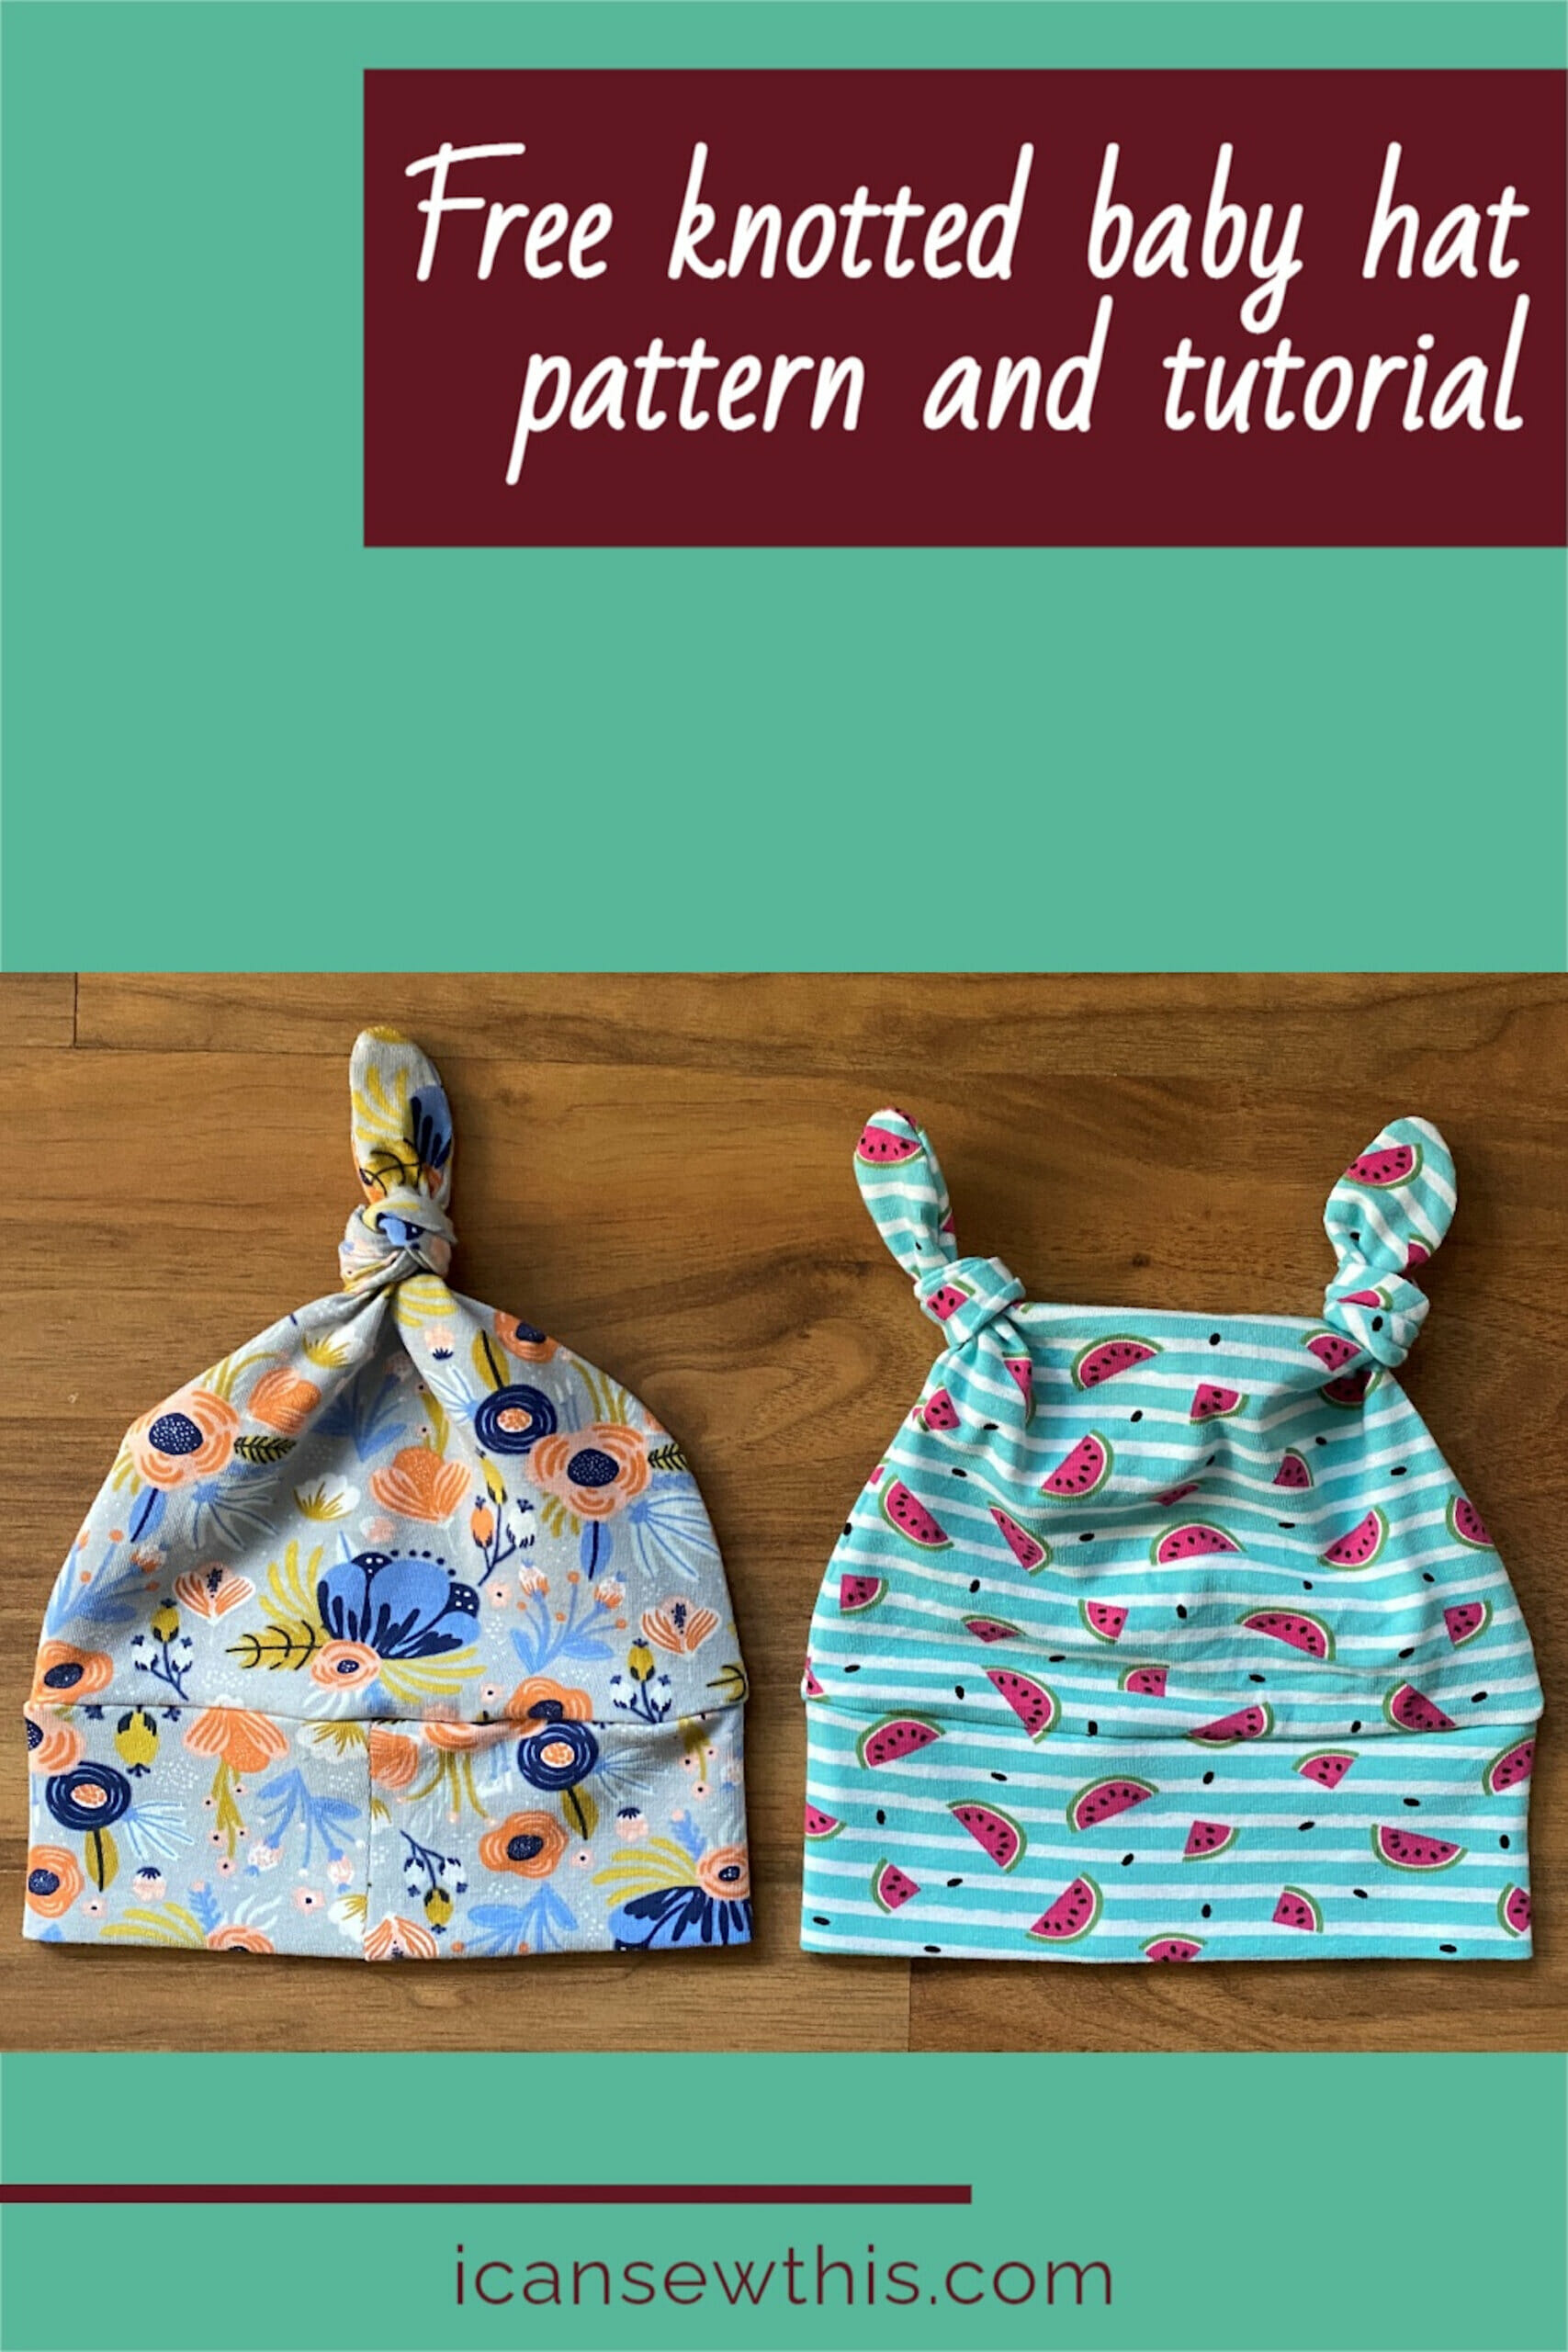 Free knotted baby hat pattern